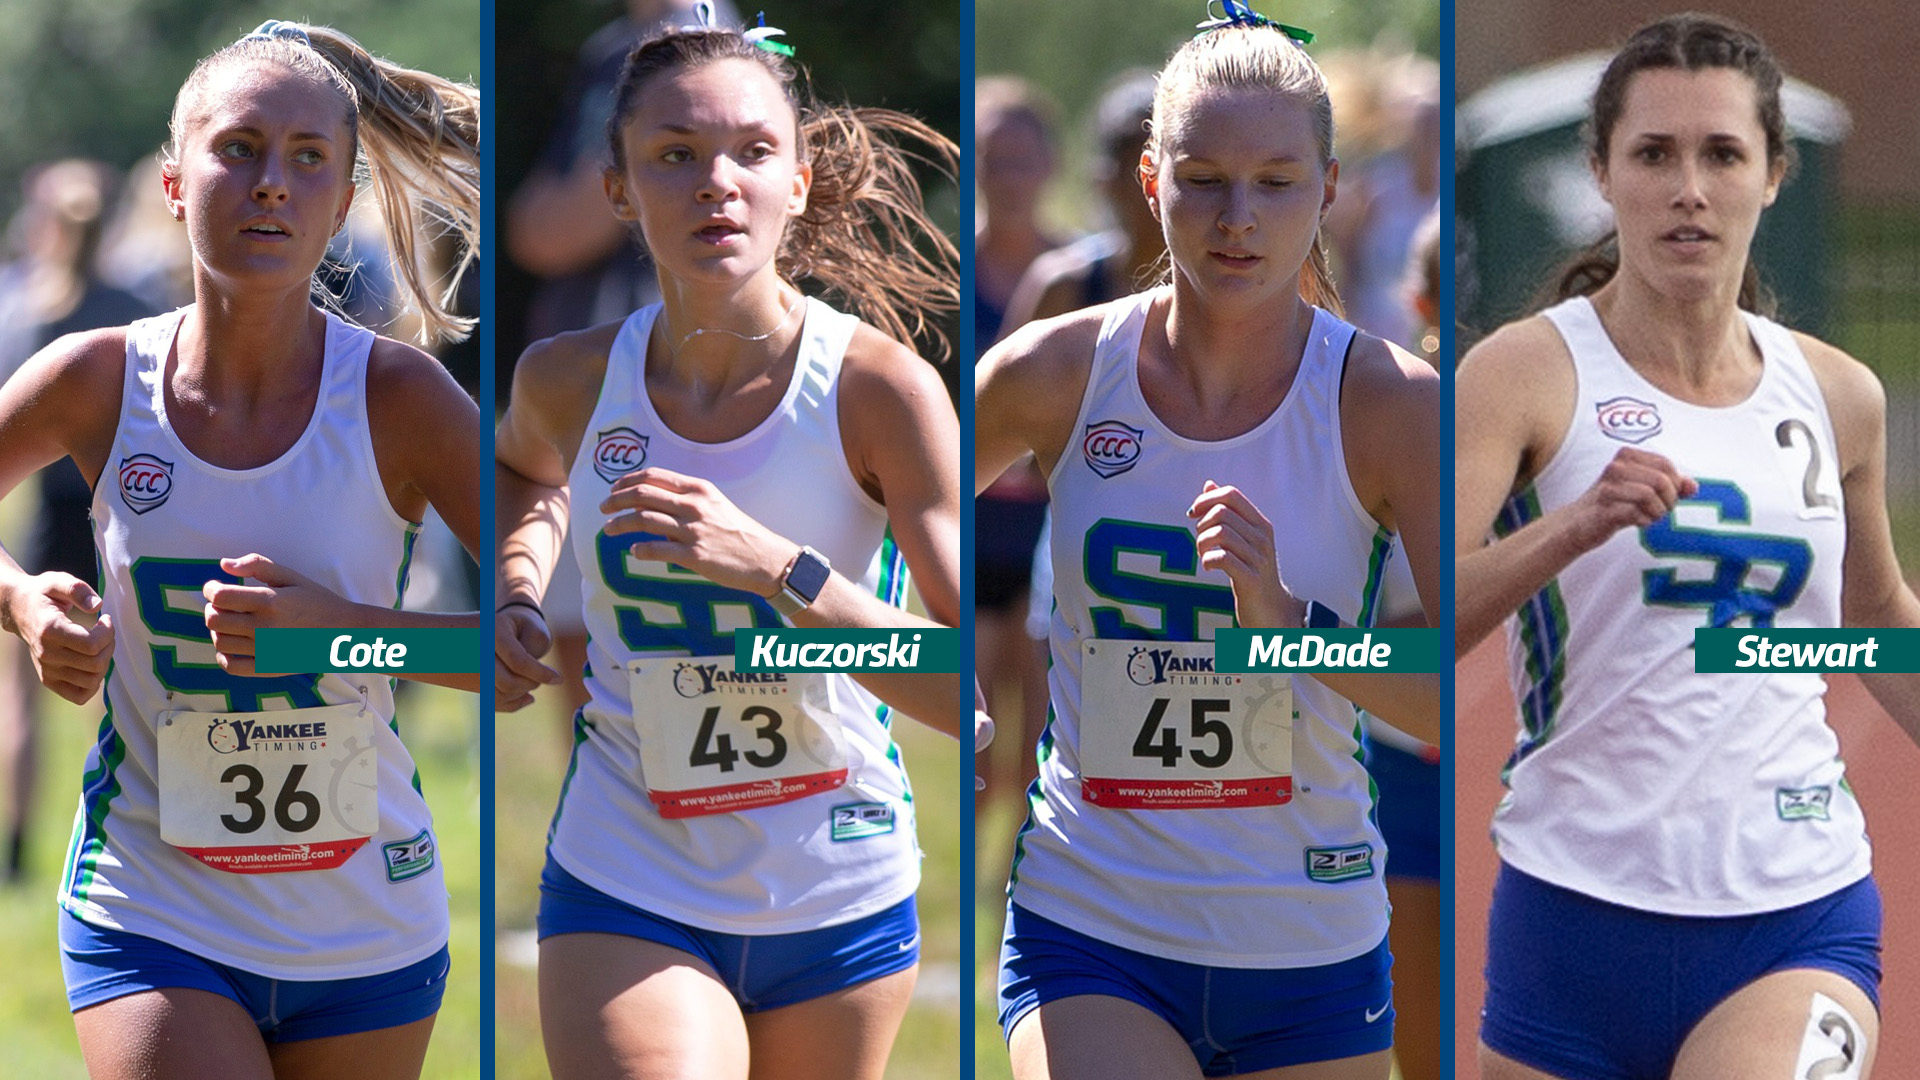 Seniors Emma Cote, Izabella Kuczorski, Paige McDade, and Morgan Stewart have been appointed captains of the women's cross country team at Salve Regina